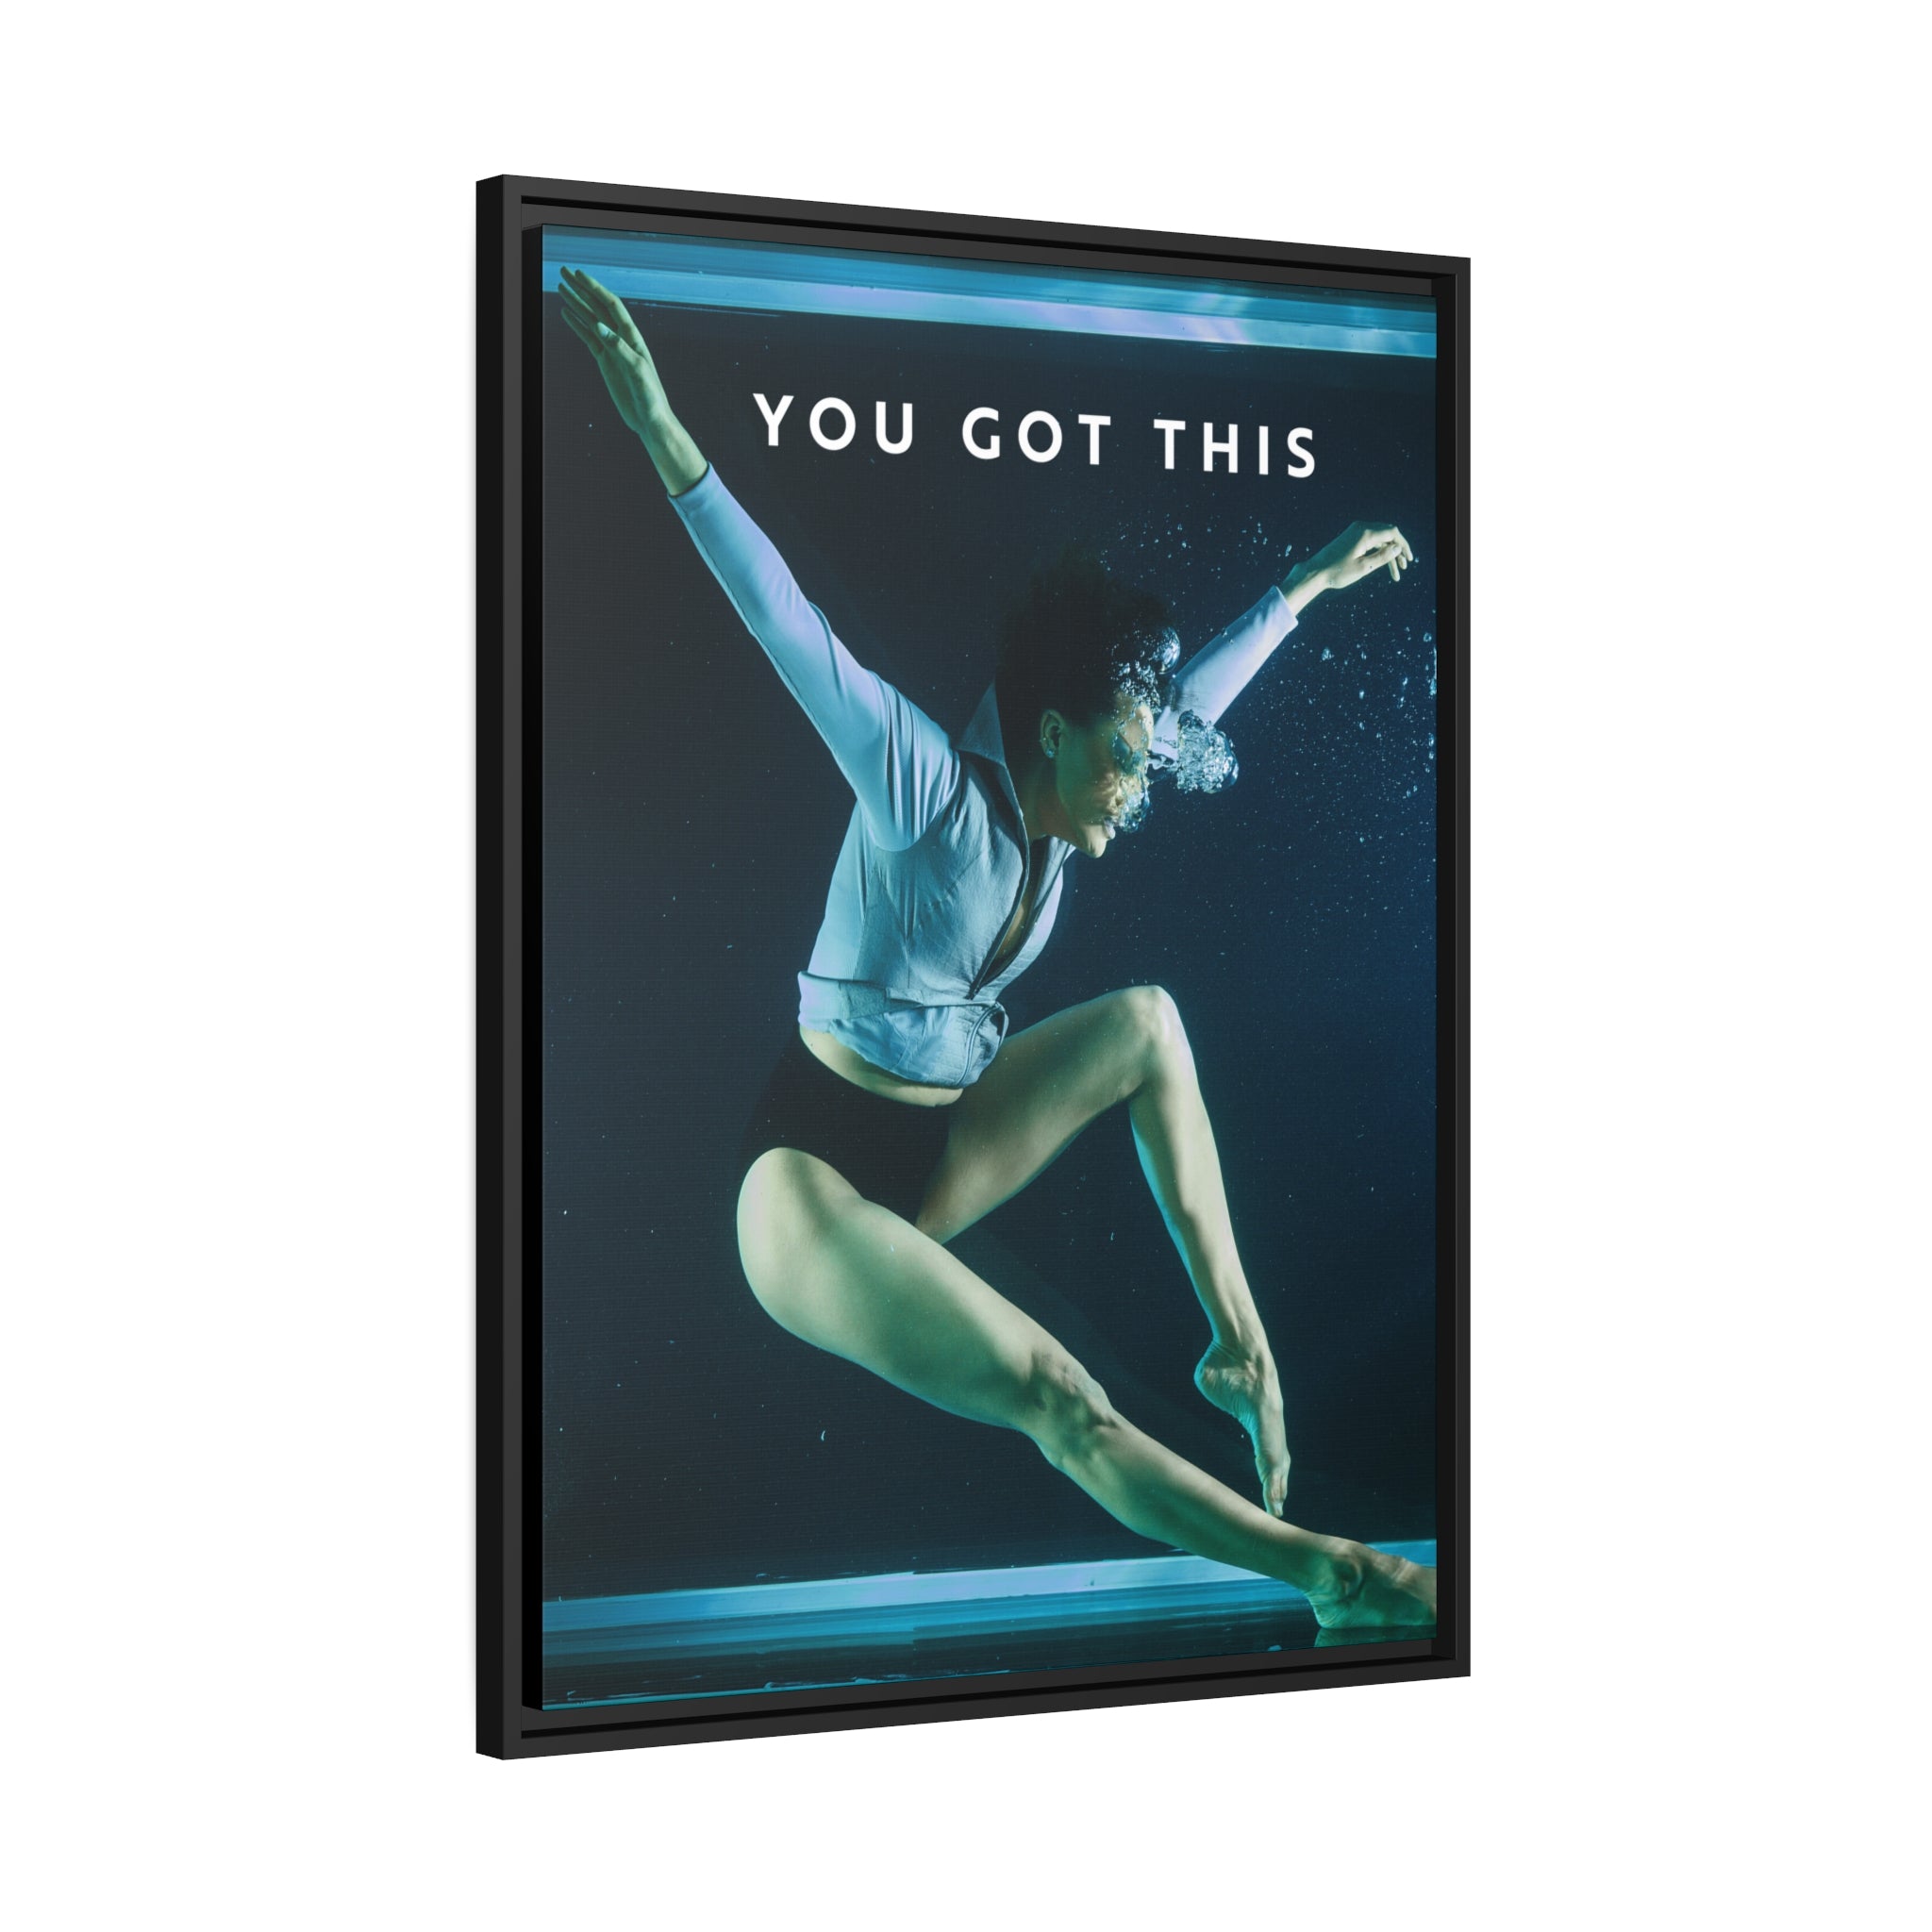 You Got This - Grace Under Pressure - Framed Canvas additional image 2